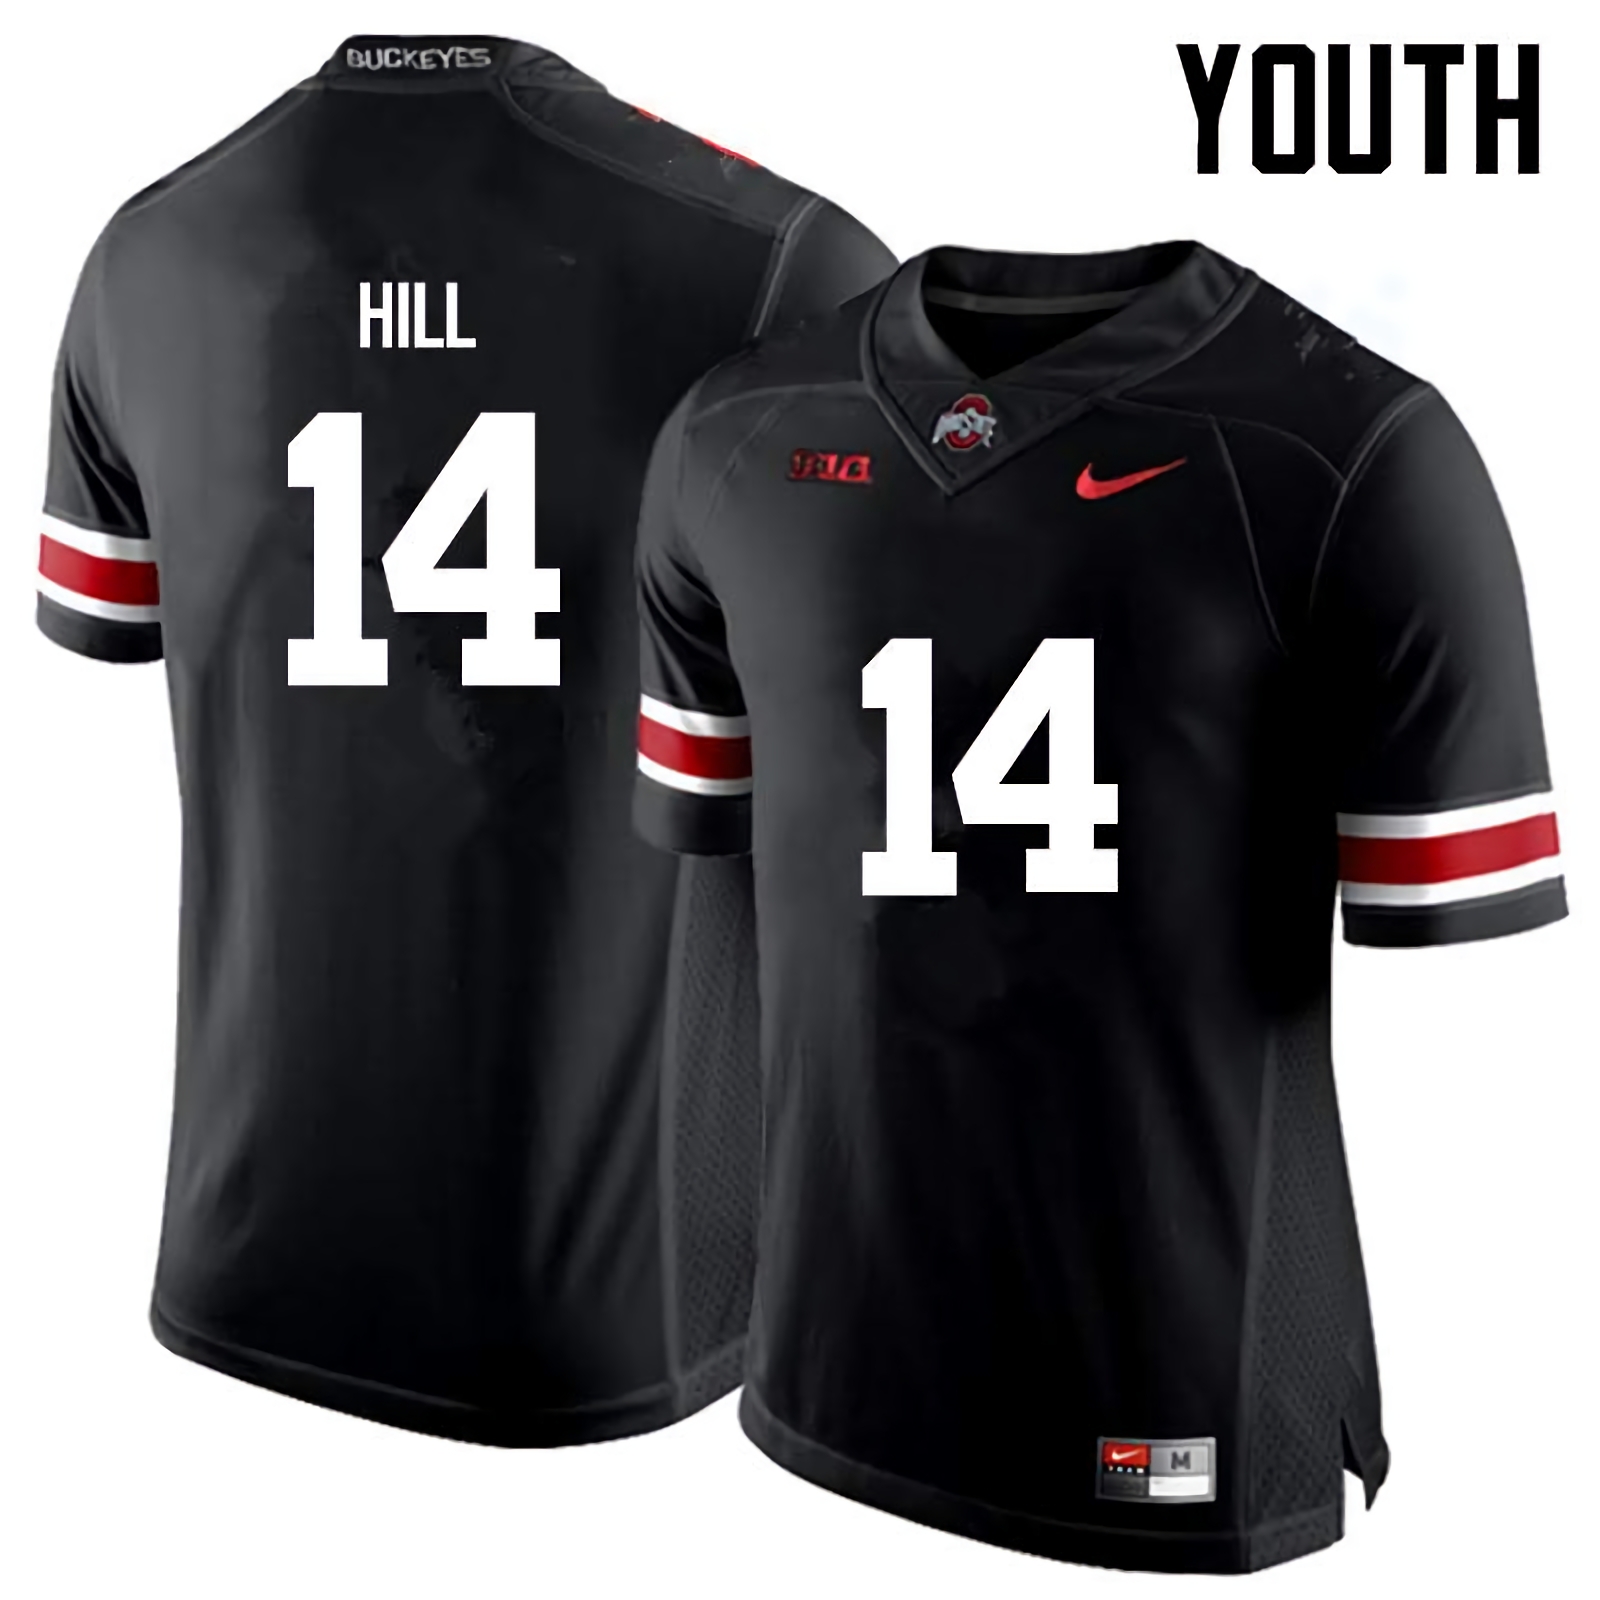 KJ Hill Ohio State Buckeyes Youth NCAA #14 Nike Black College Stitched Football Jersey OUE7656VY